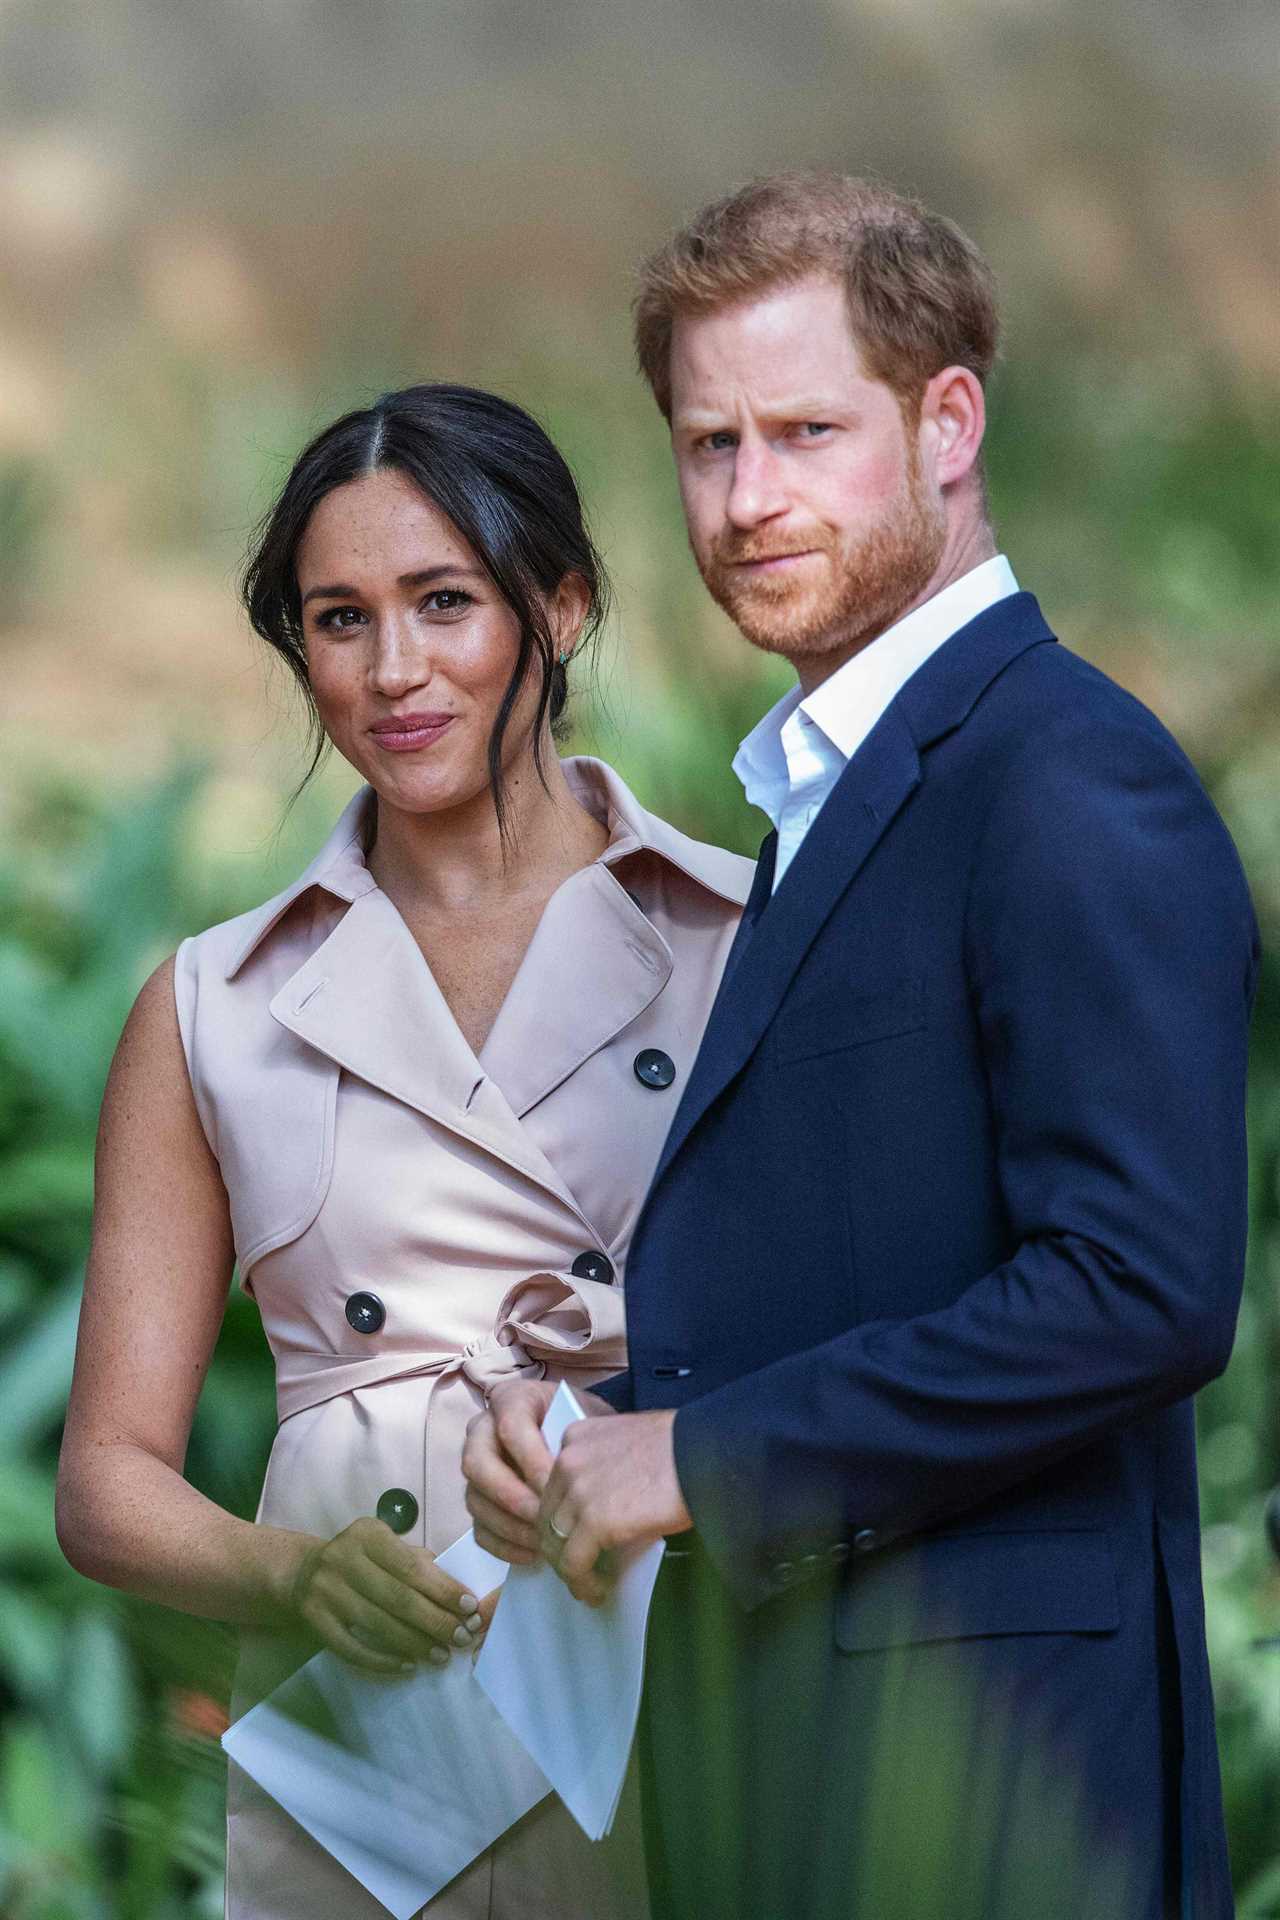 Royal staff’s secret code names for Meghan Markle and Prince Harry revealed in explosive book